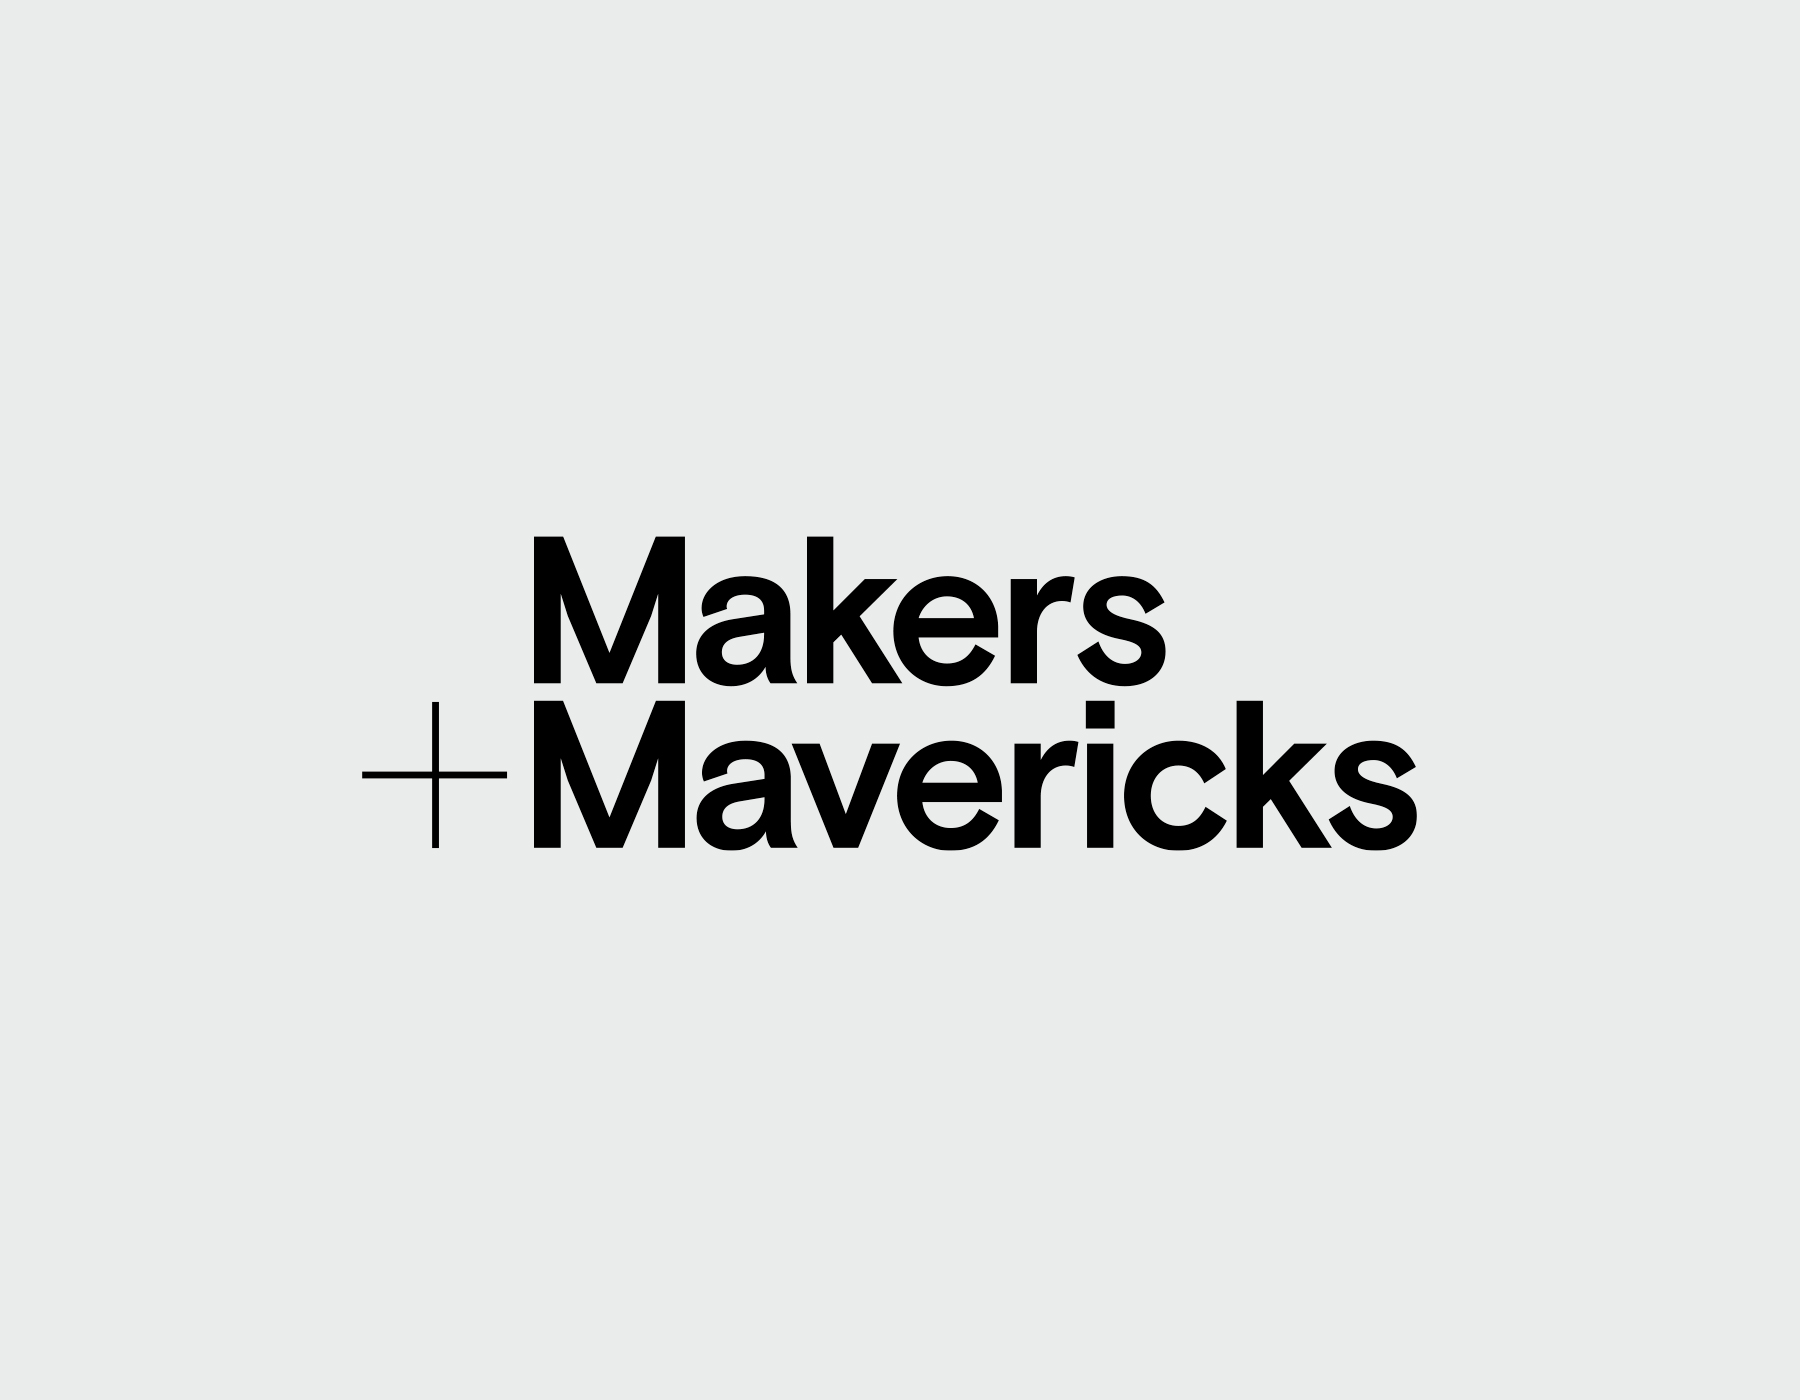 Makers and Mavericks identity by Colour Format